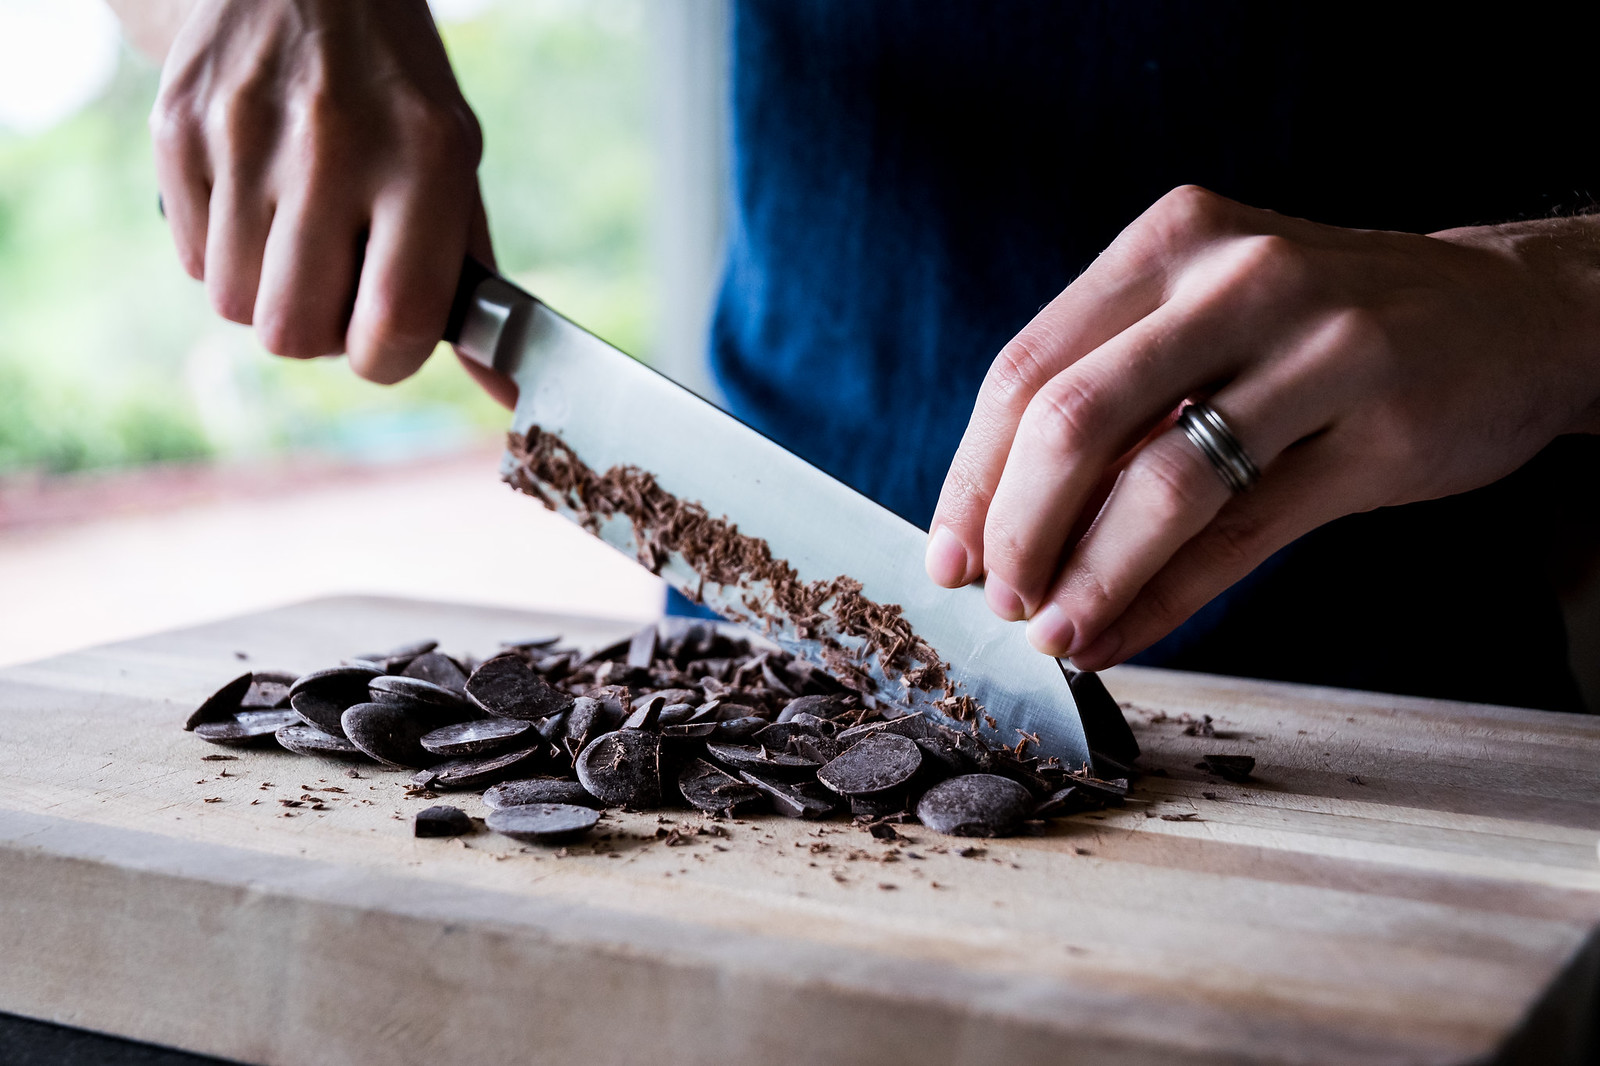 chopping the chocolate first helps it melt quicker